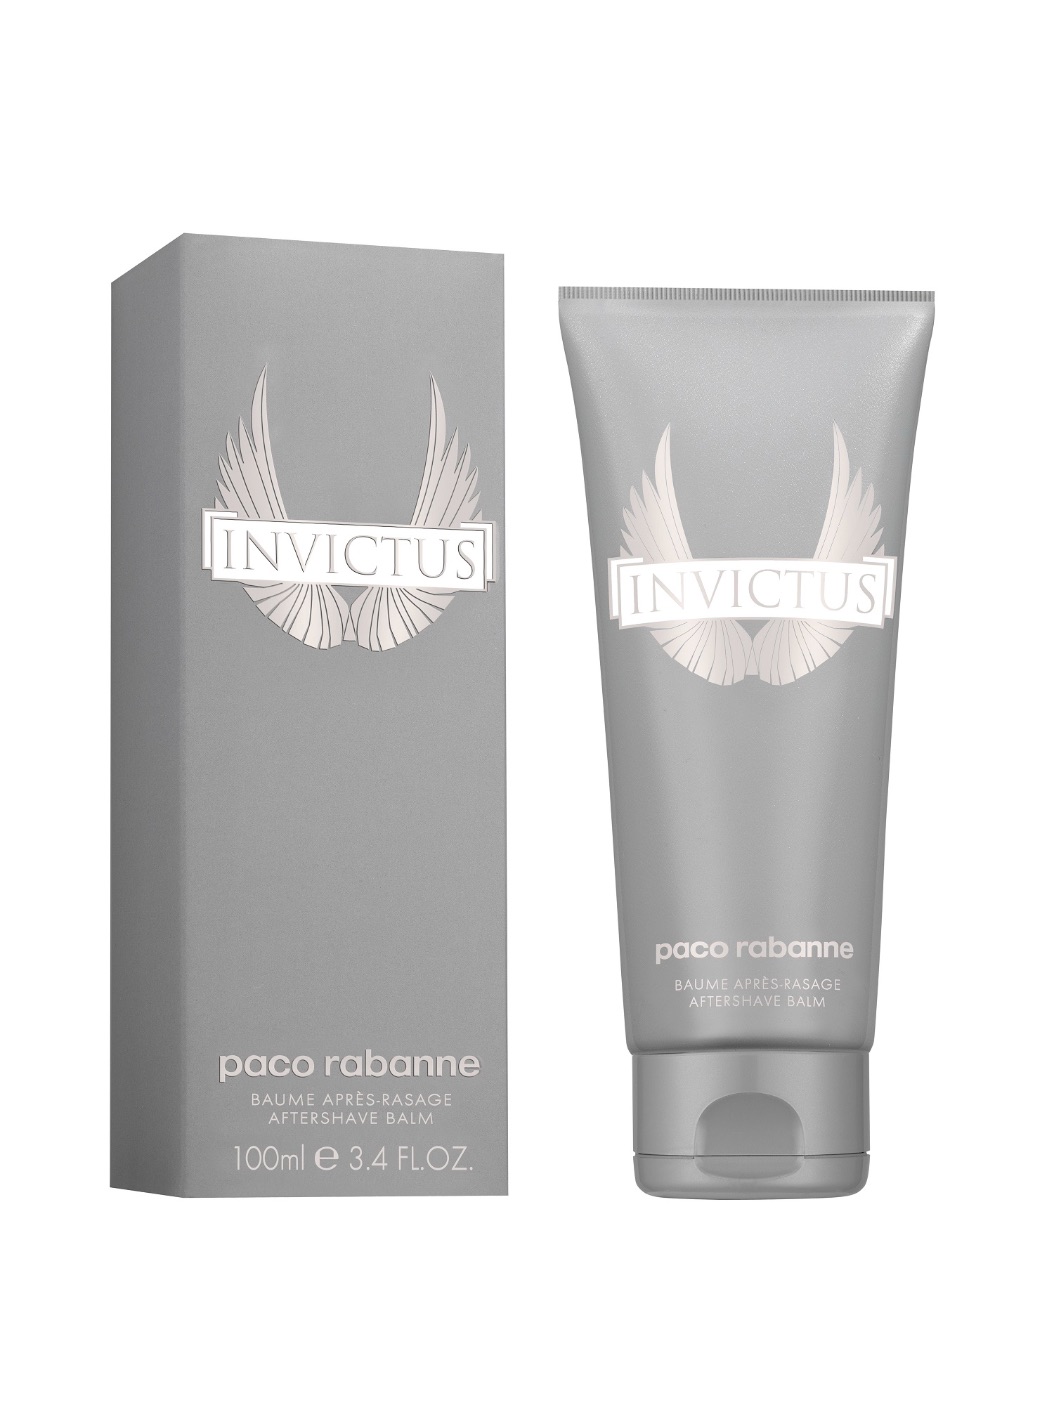 Paco Rabanne Invictus Aftershave Balm 100ml - thefragrancecounter.co.uk